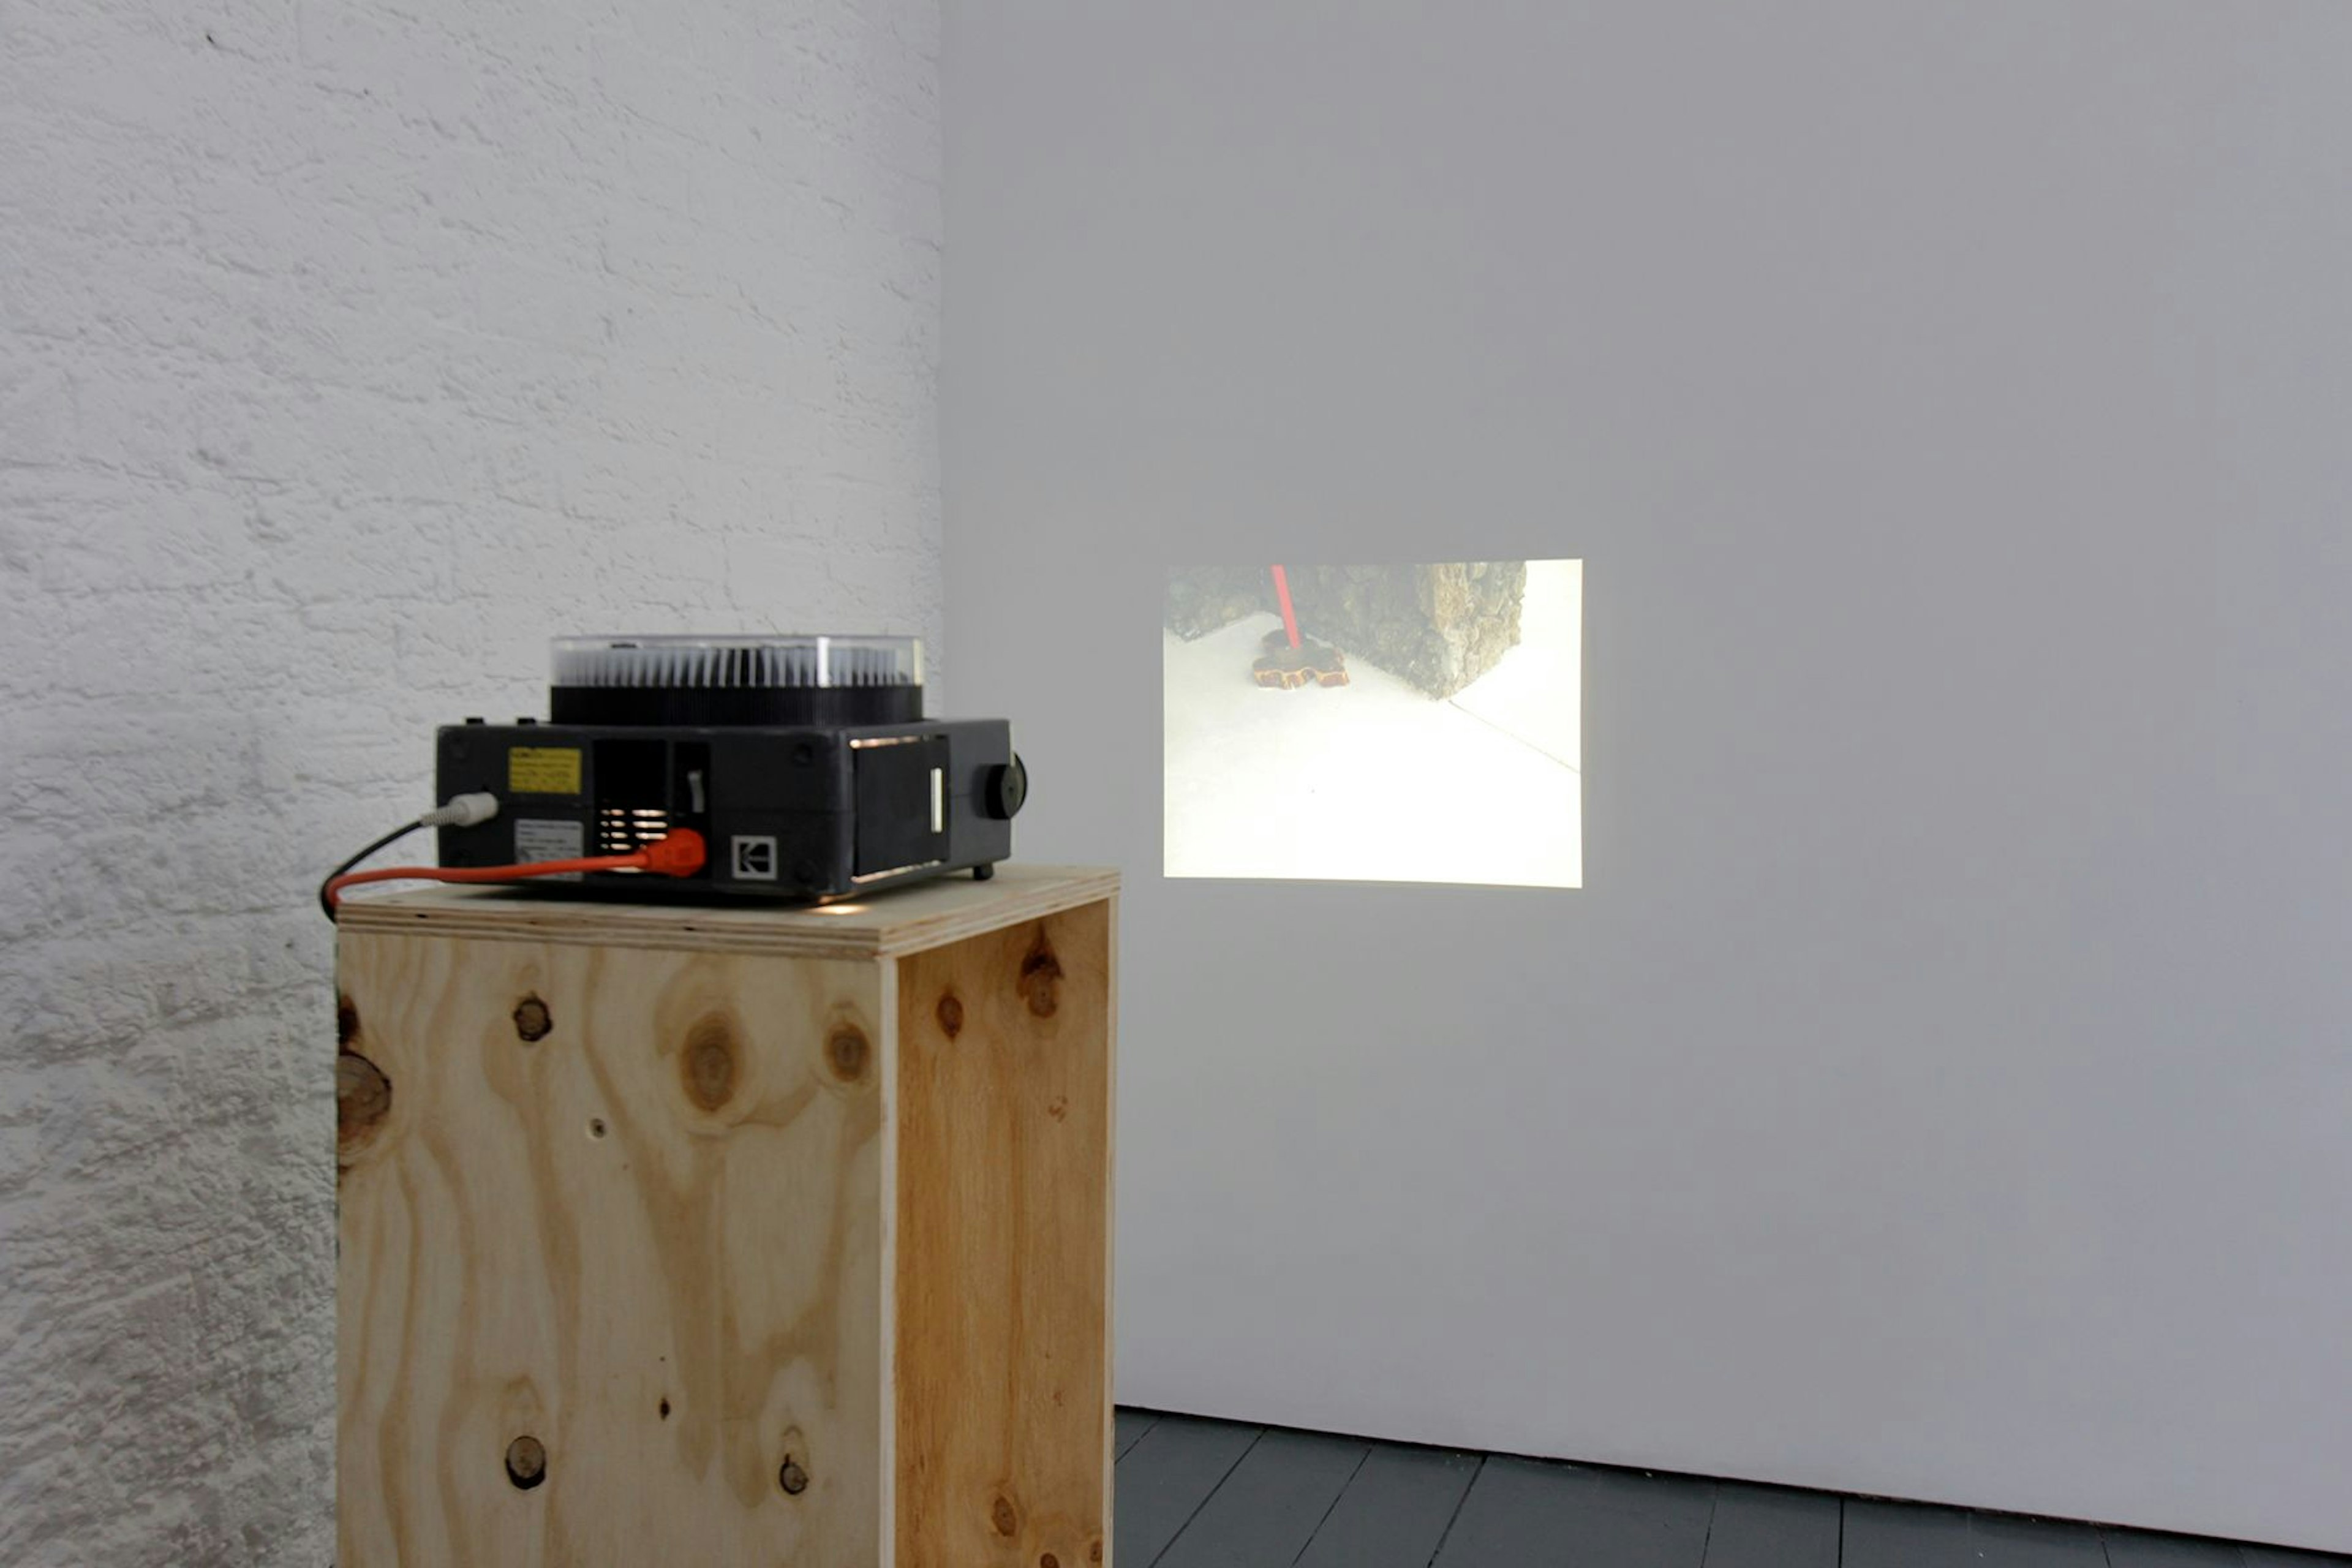 Grounds, 2003-13 installation view